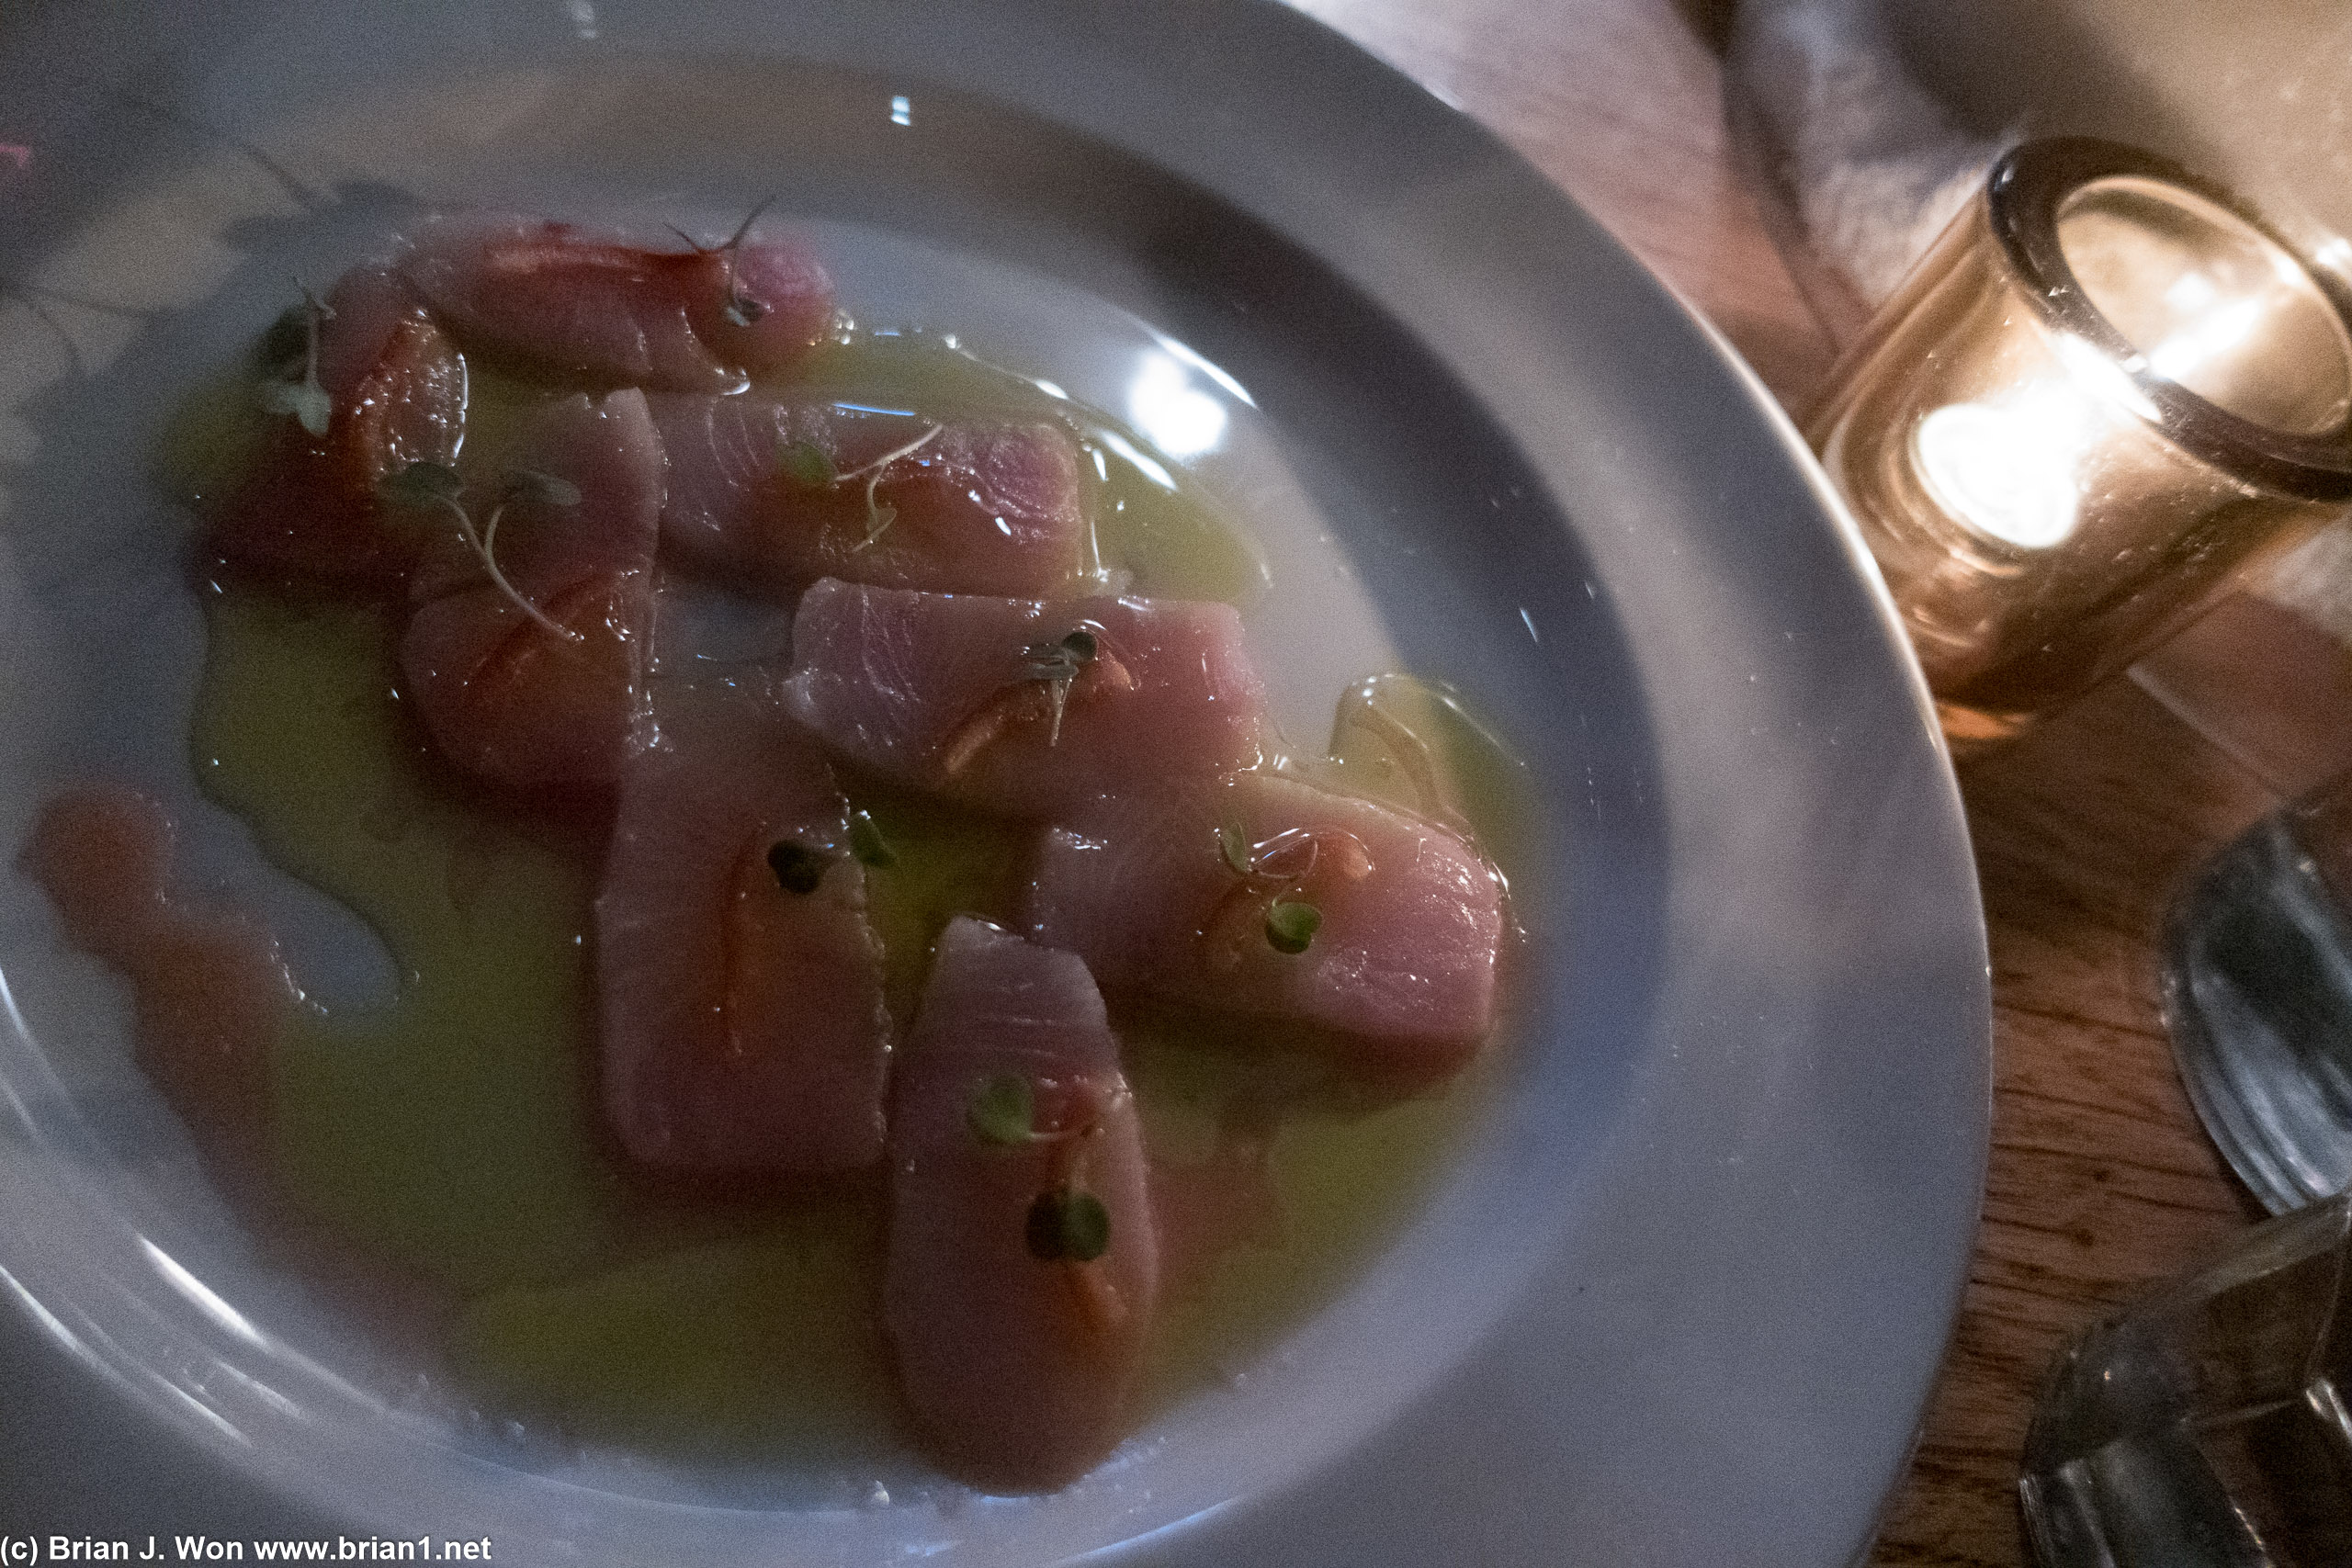 Yellowtail (hamachi) crudo was quite good. Just a hint of jalapeno was a nice compliment.